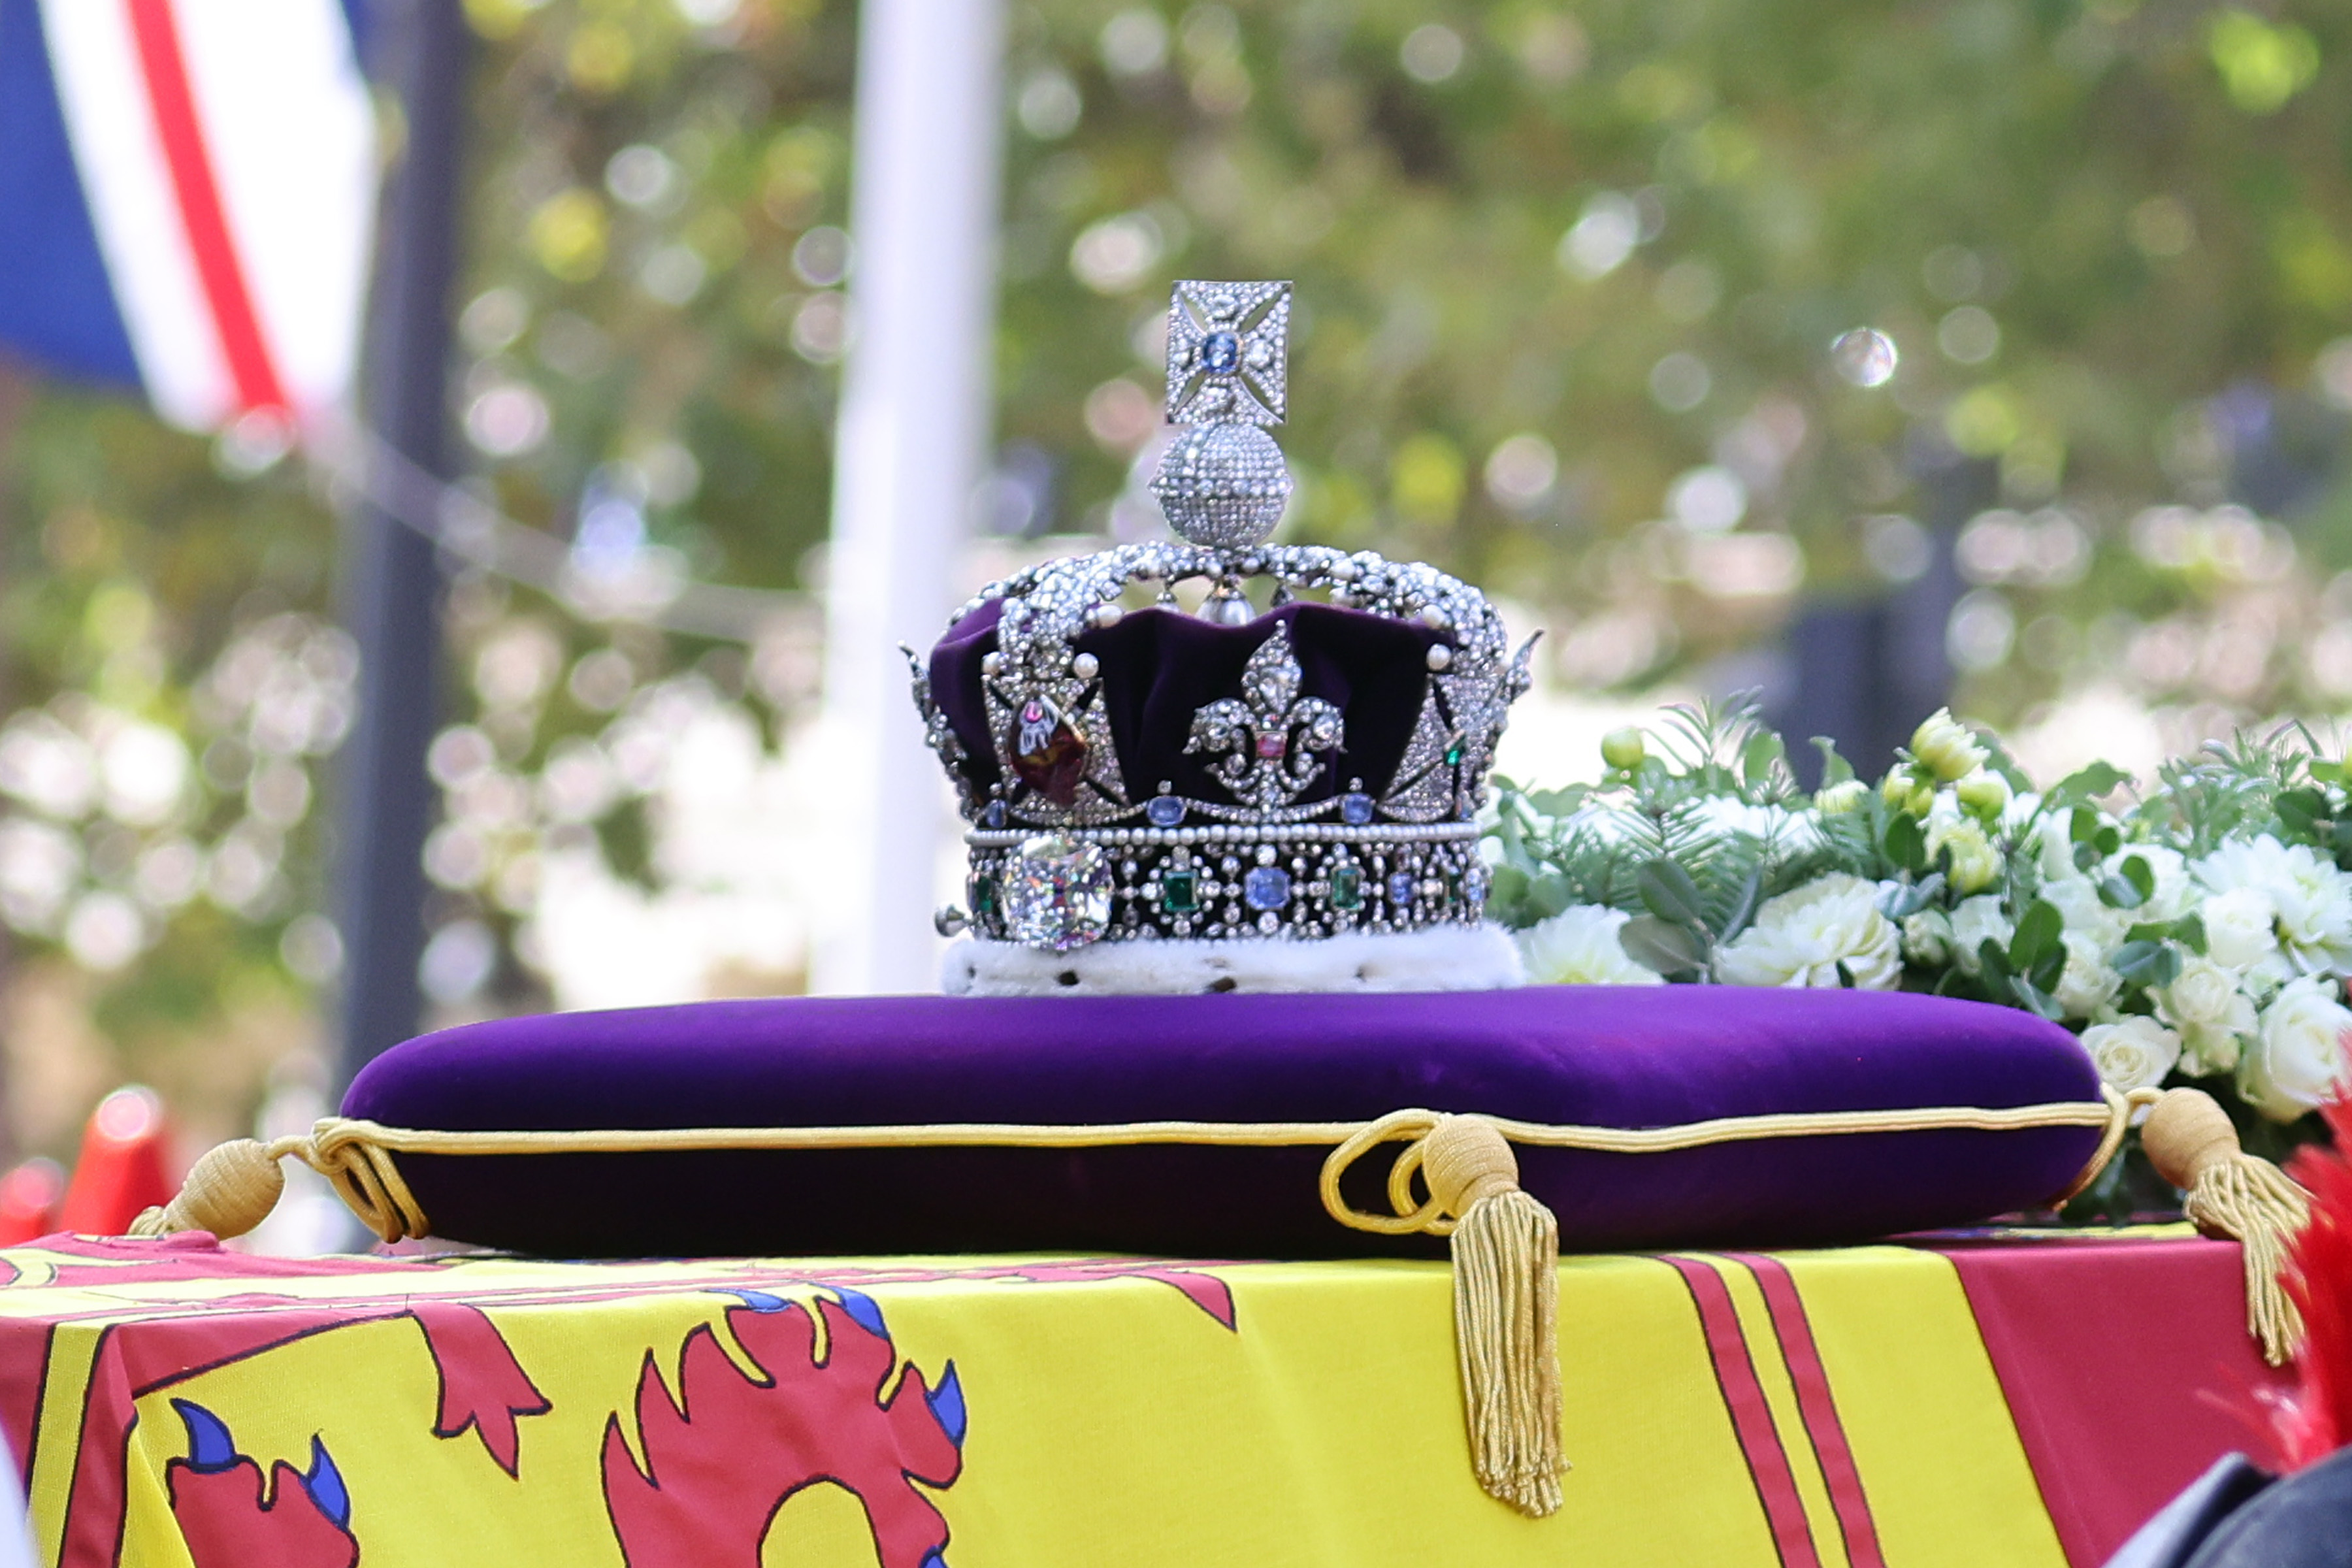 <p>The Imperial State Crown sat on a velvet cushion atop Queen Elizabeth II's coffin as it traveled from Buckingham Palace to Westminster Hall in London on Sept. 14, 2022, for her lying-in-state. The crown was made for the coronation of her father, King George VI in 1937, and then worn by Elizabeth at her own coronation in 1953.</p>